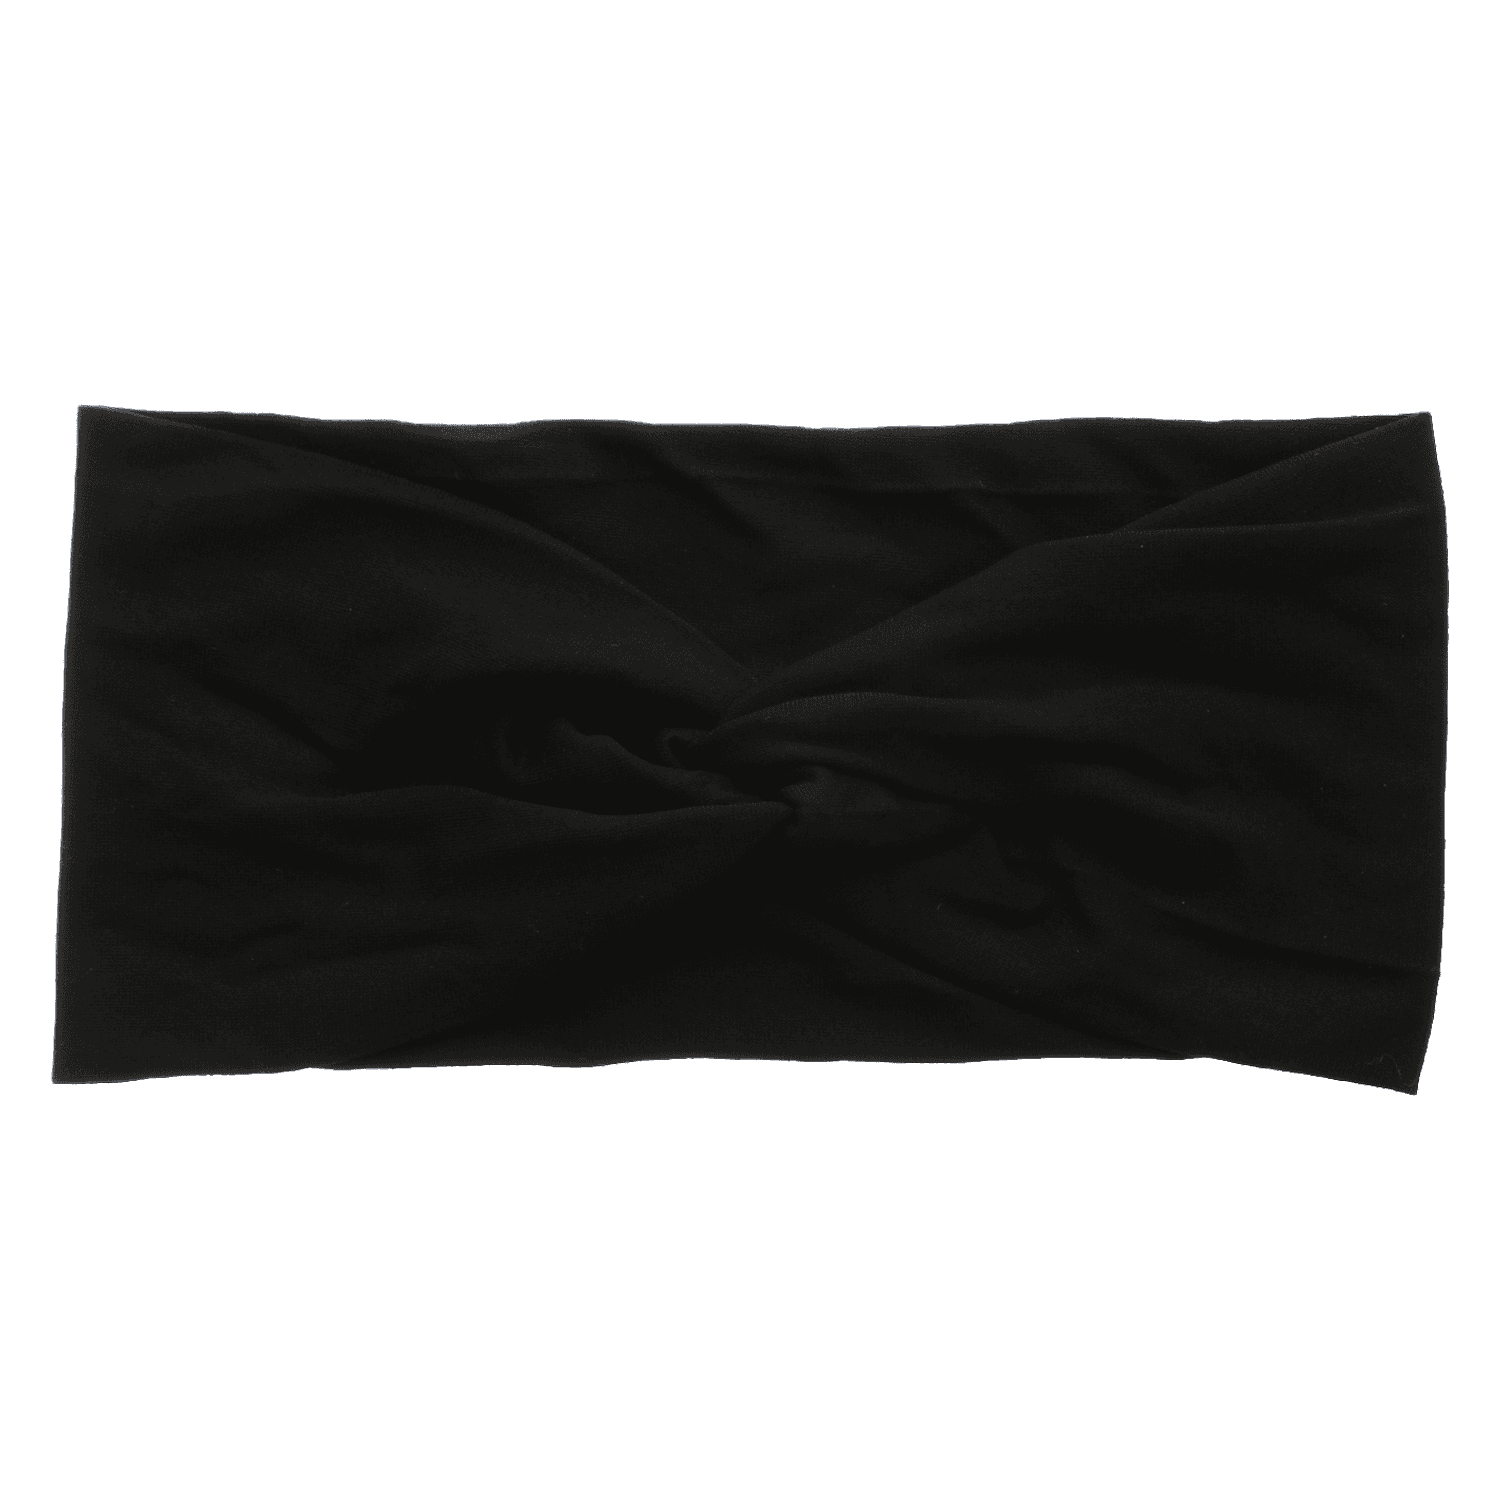 TRISA Hair - Super soft hairband with knot, black